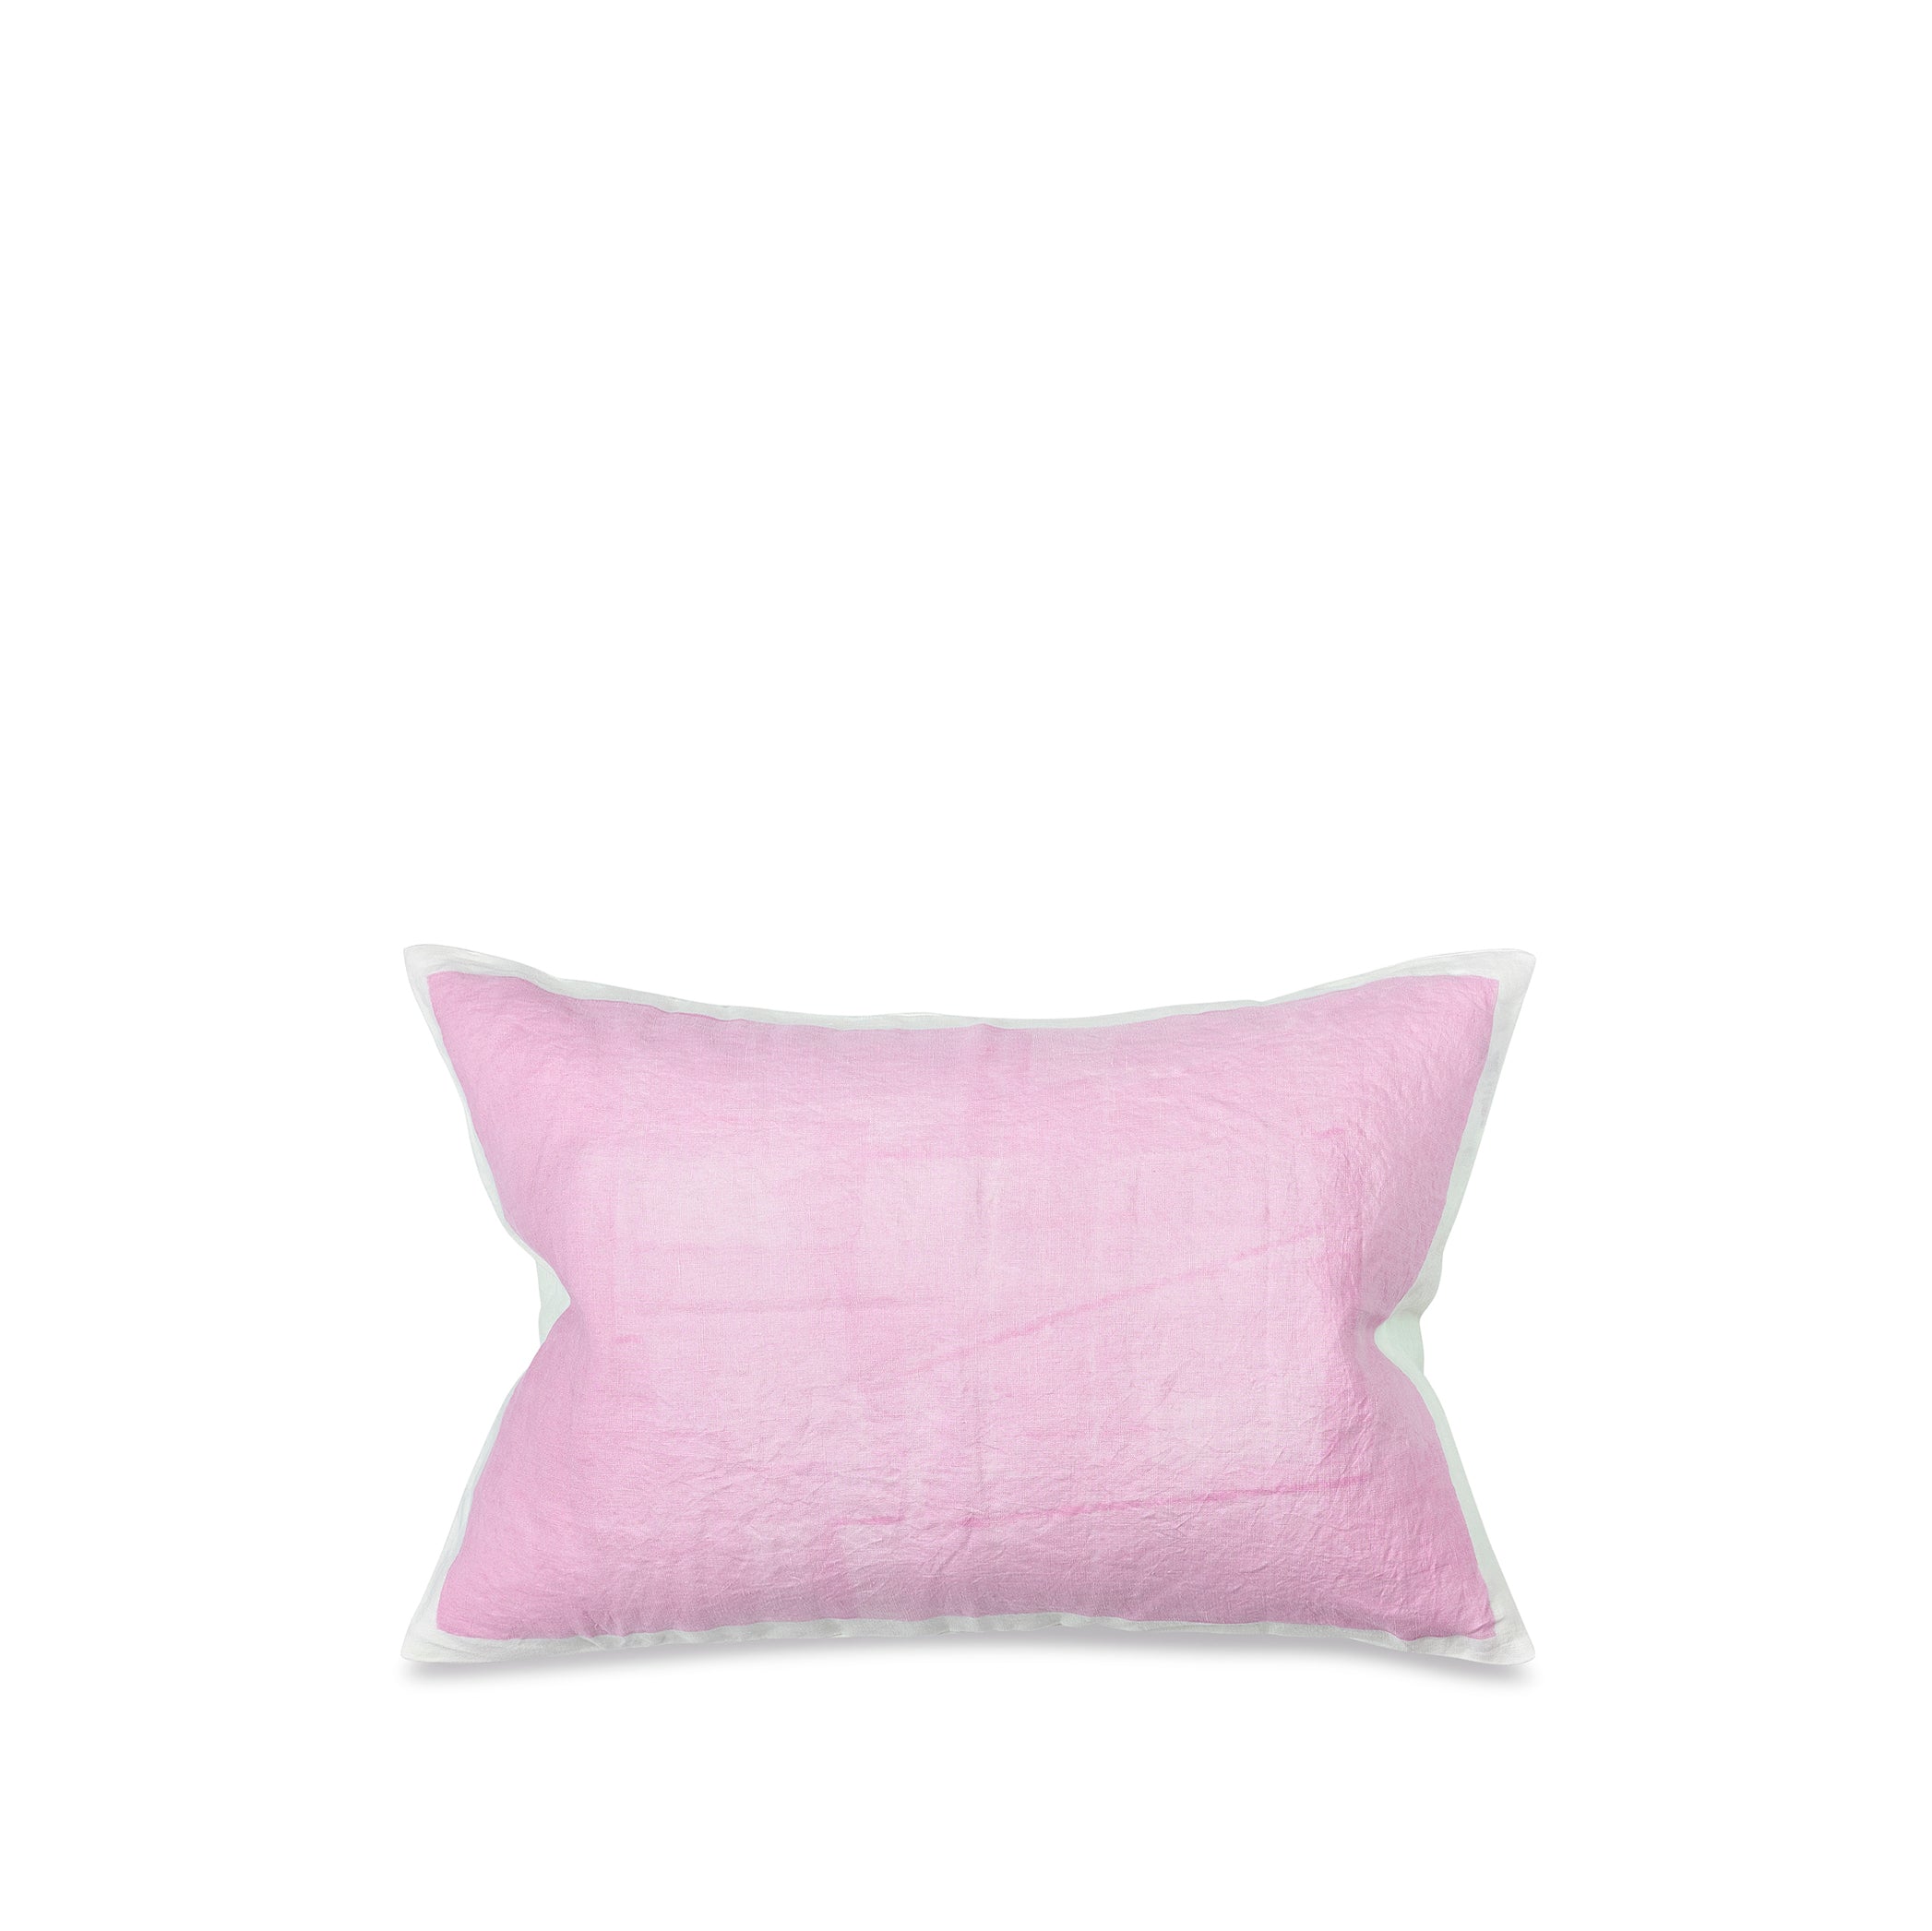 Hand Painted Linen Cushion in Pale Pink, 60cm x 40cm